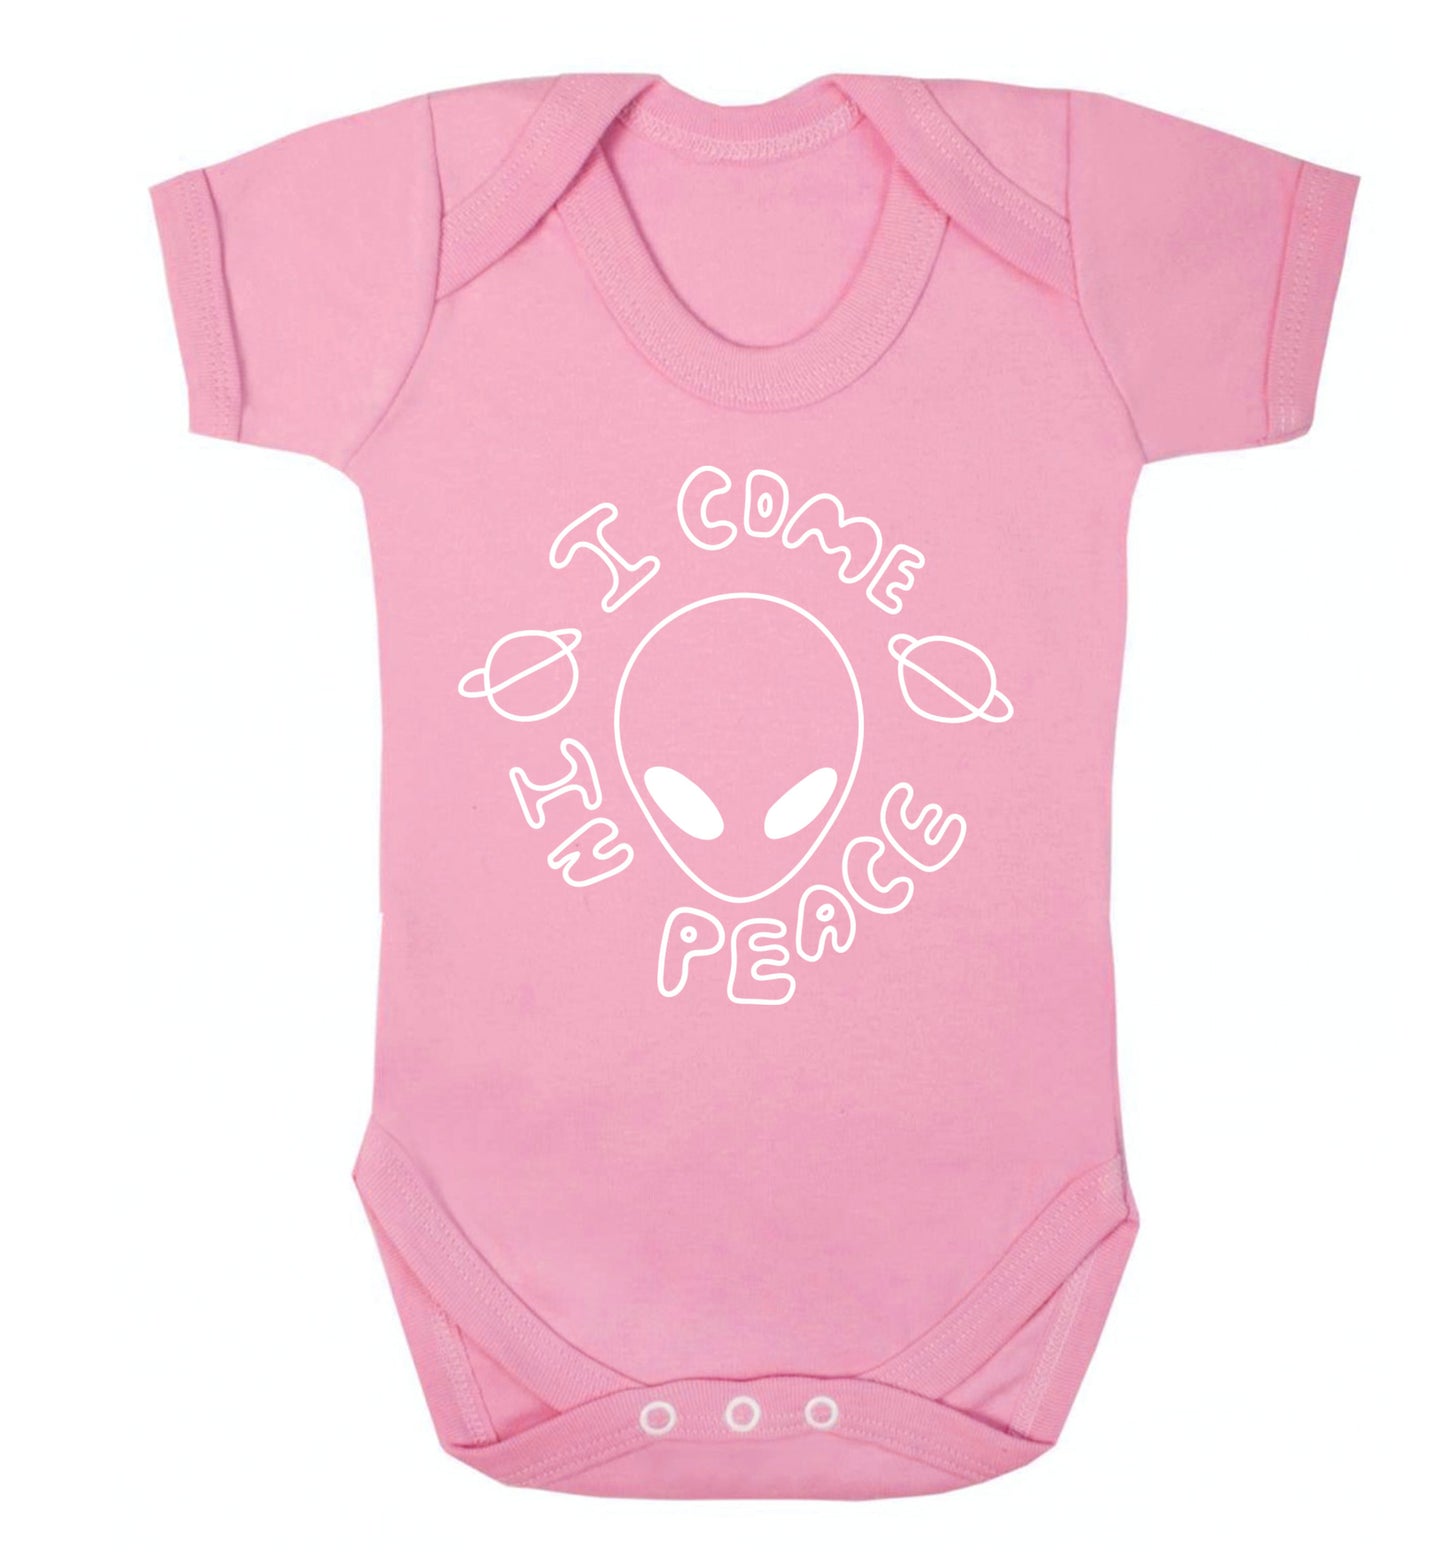 I come in peace Baby Vest pale pink 18-24 months